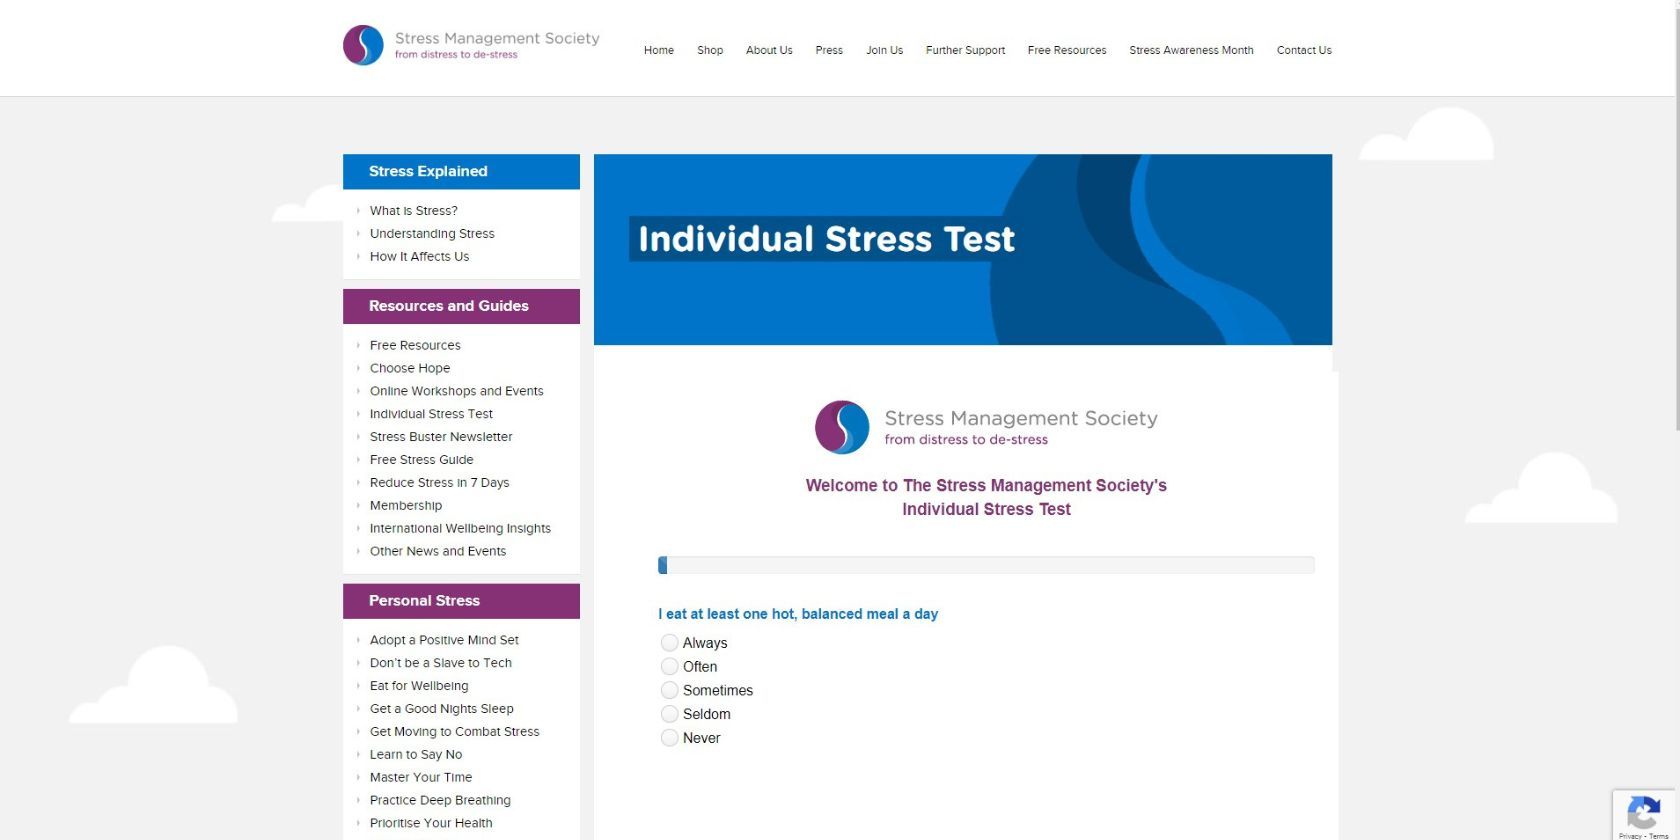 Individual Stress Test by The Stress Management Society 